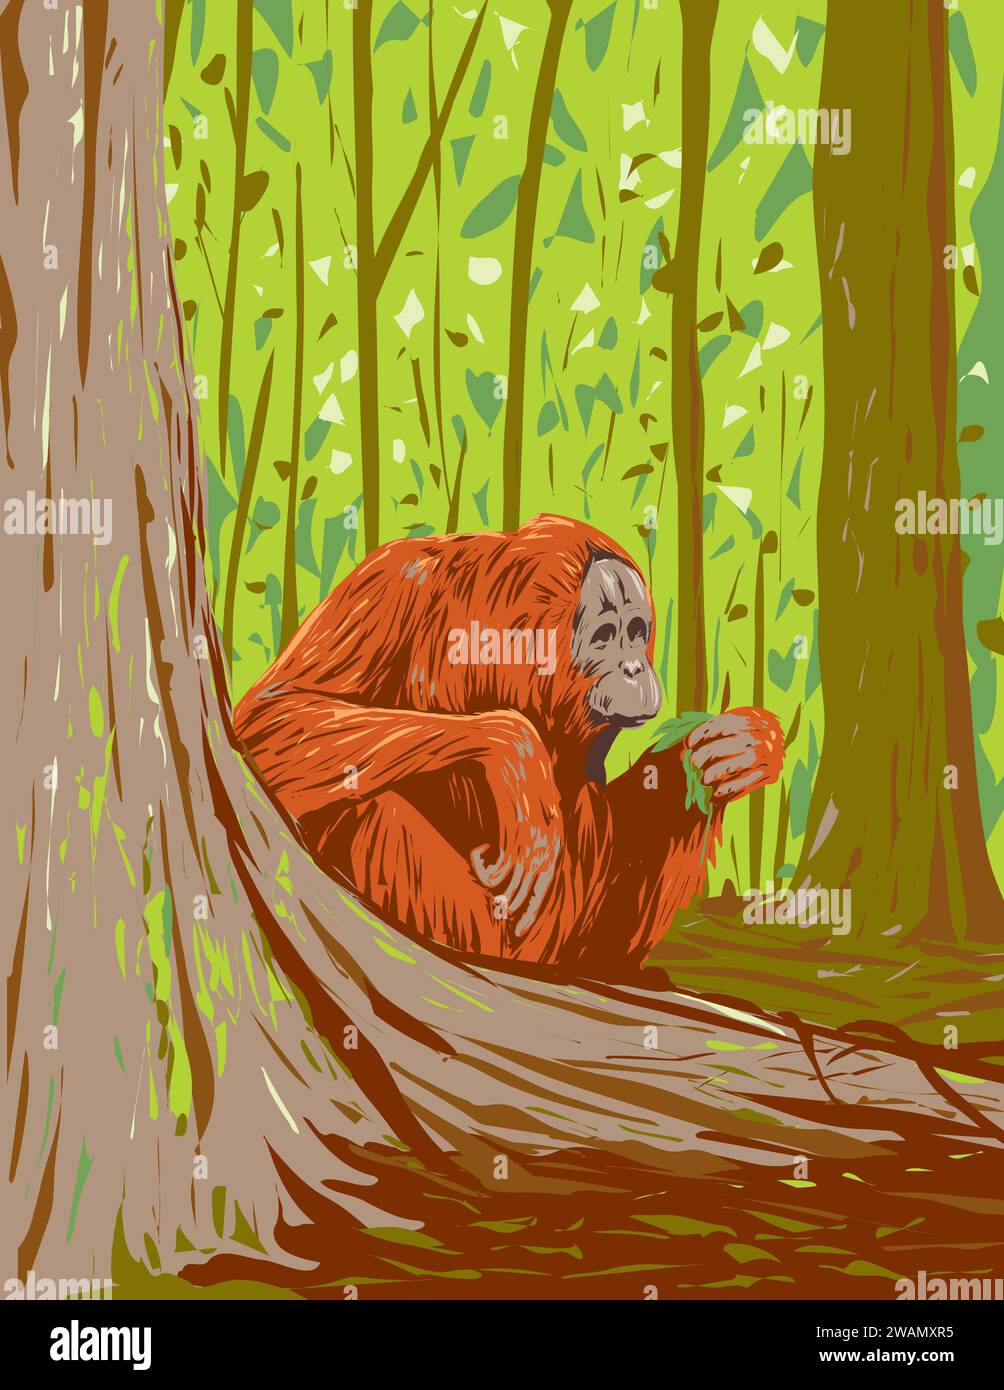 Art Deco or WPA poster of an orangutan in the forest of Kutai National Park located in East Kalimantan on Indonesian Borneo done in works project admi Stock Photo